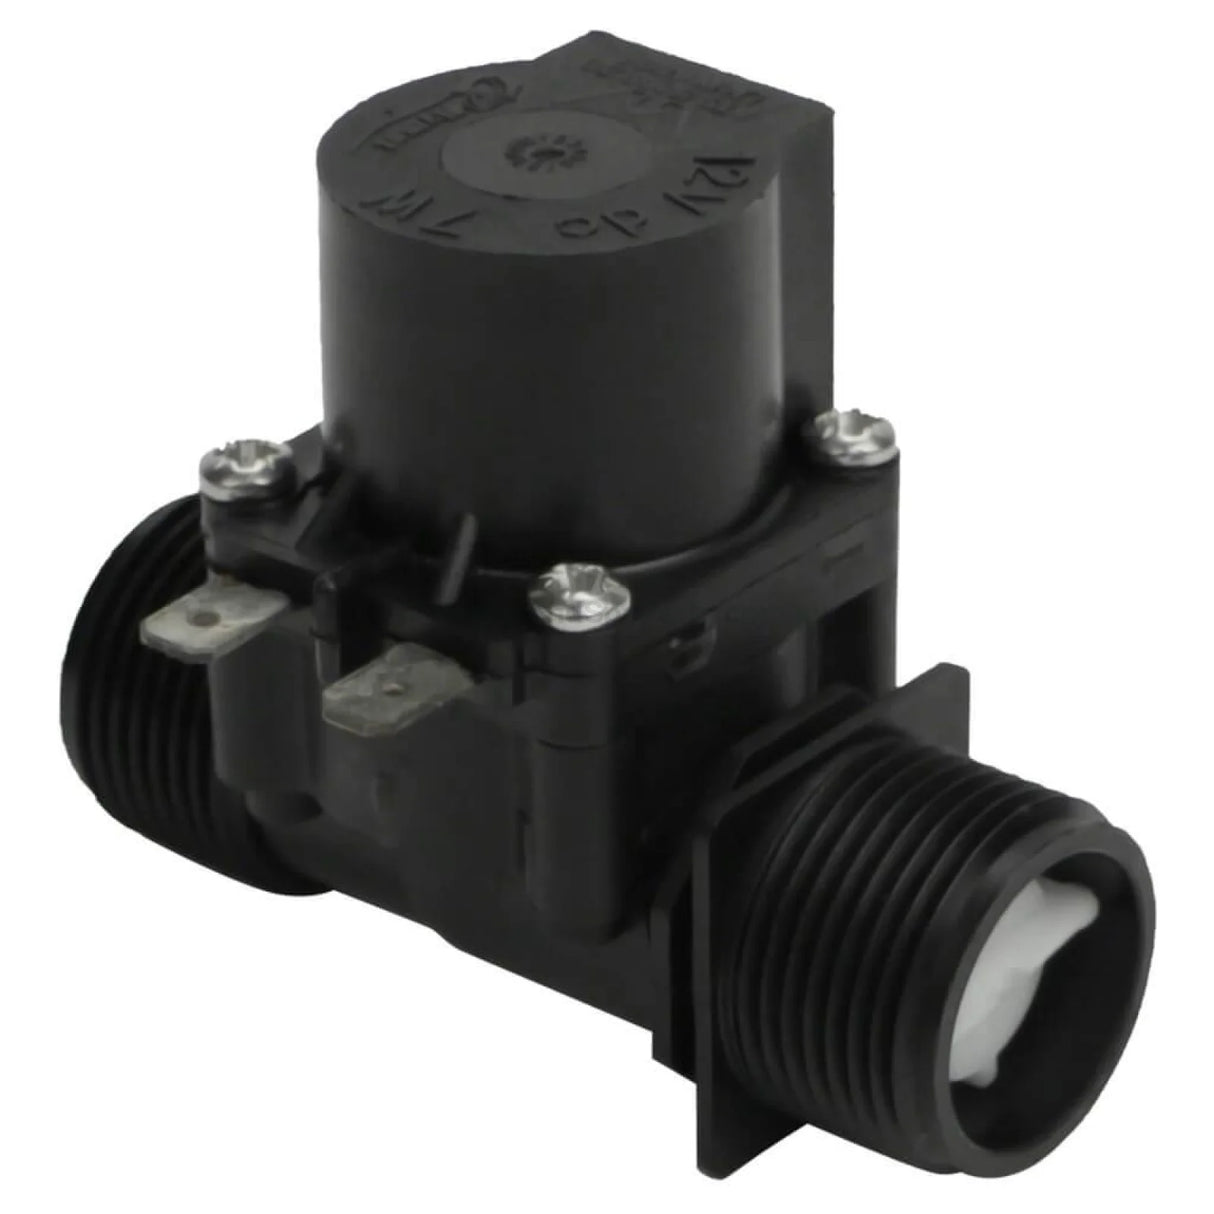 24V Solenoid Flow Control Valve for Spas - Heater and Spa Parts